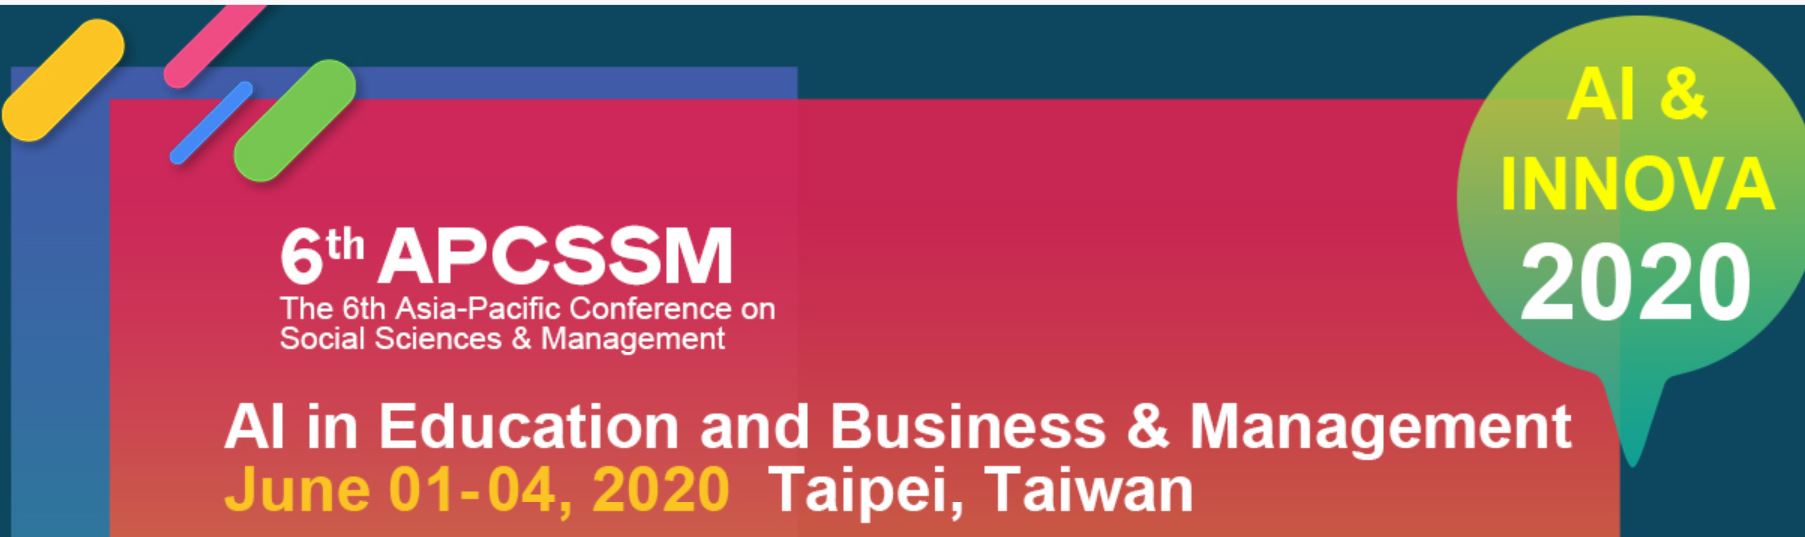 The 6th Asia-Pacific Conference on Social Sciences & Management (APCSSM 2020), Taipei, Taiwan